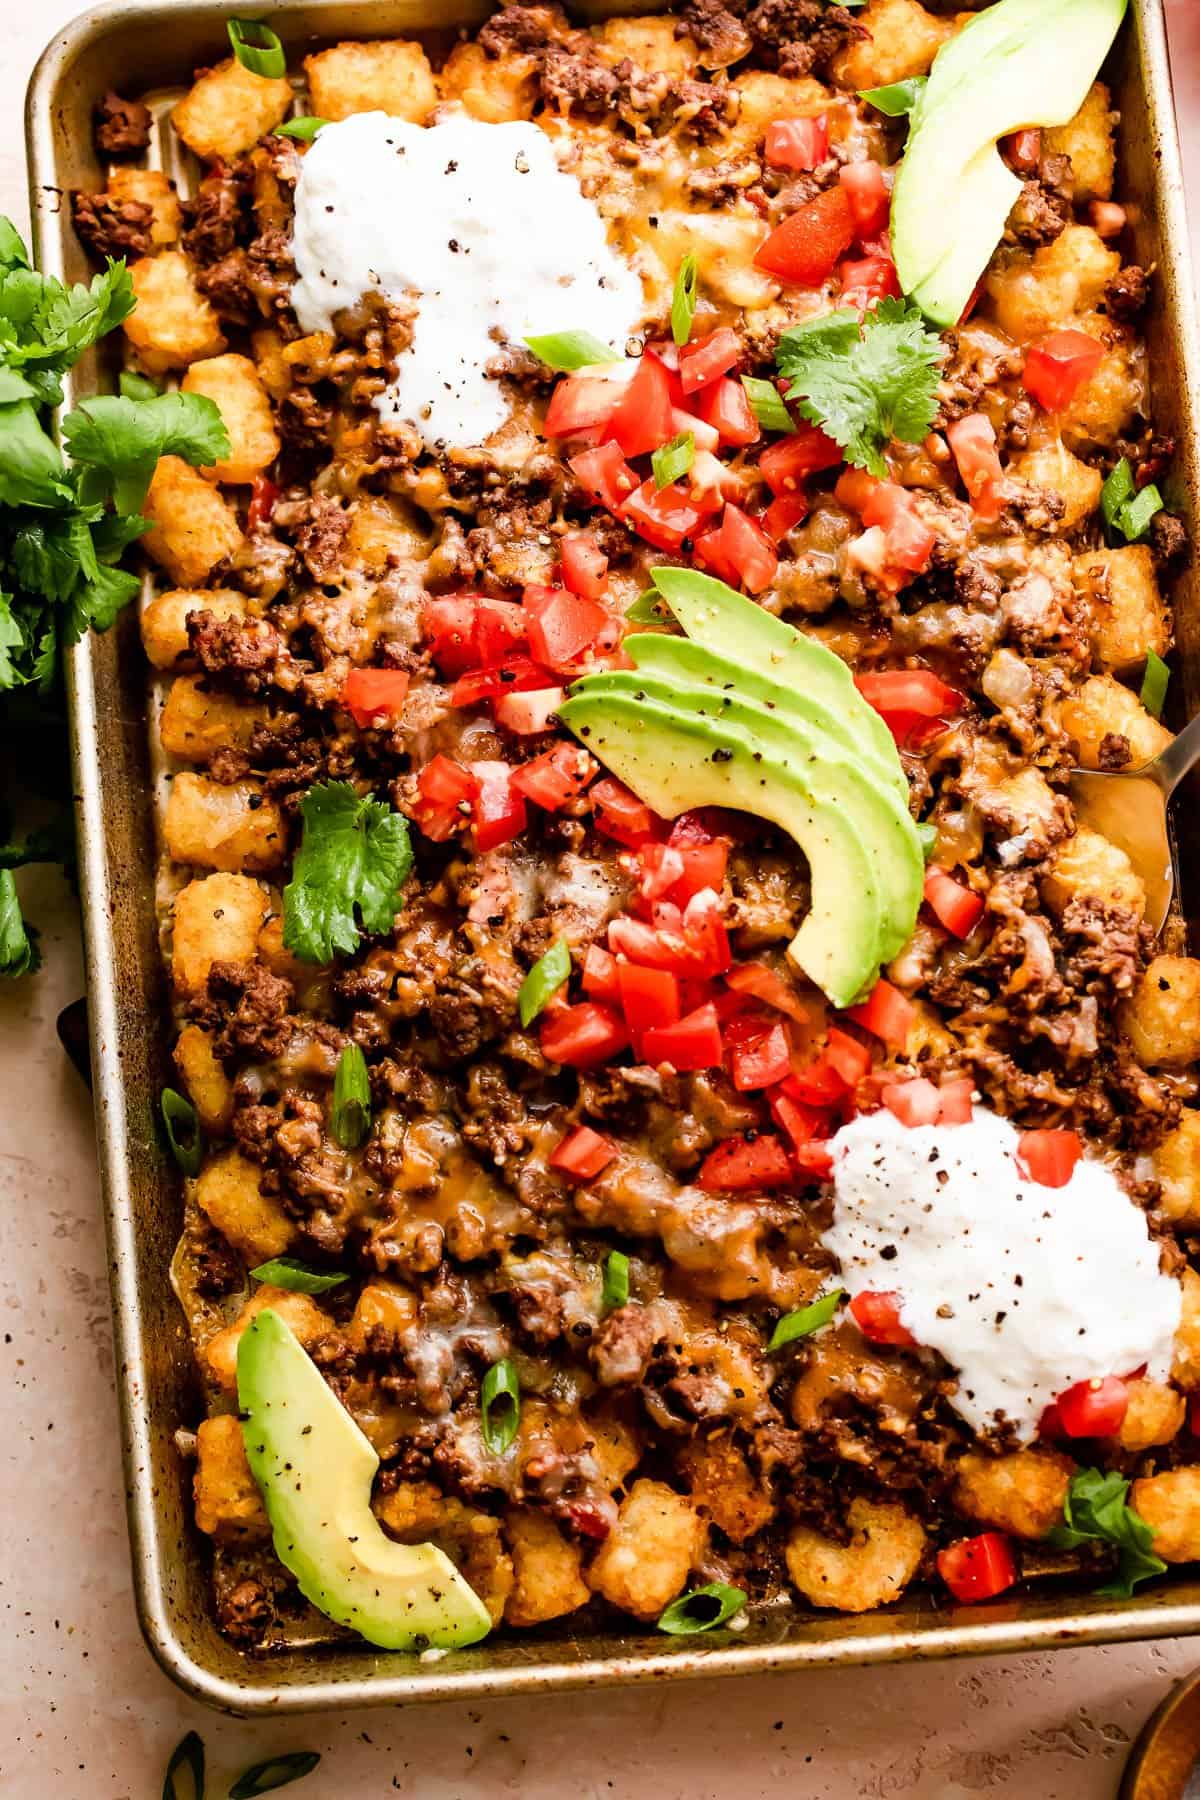 Baked tater tots topped with ground beef, tomatoes, and sliced avocado.